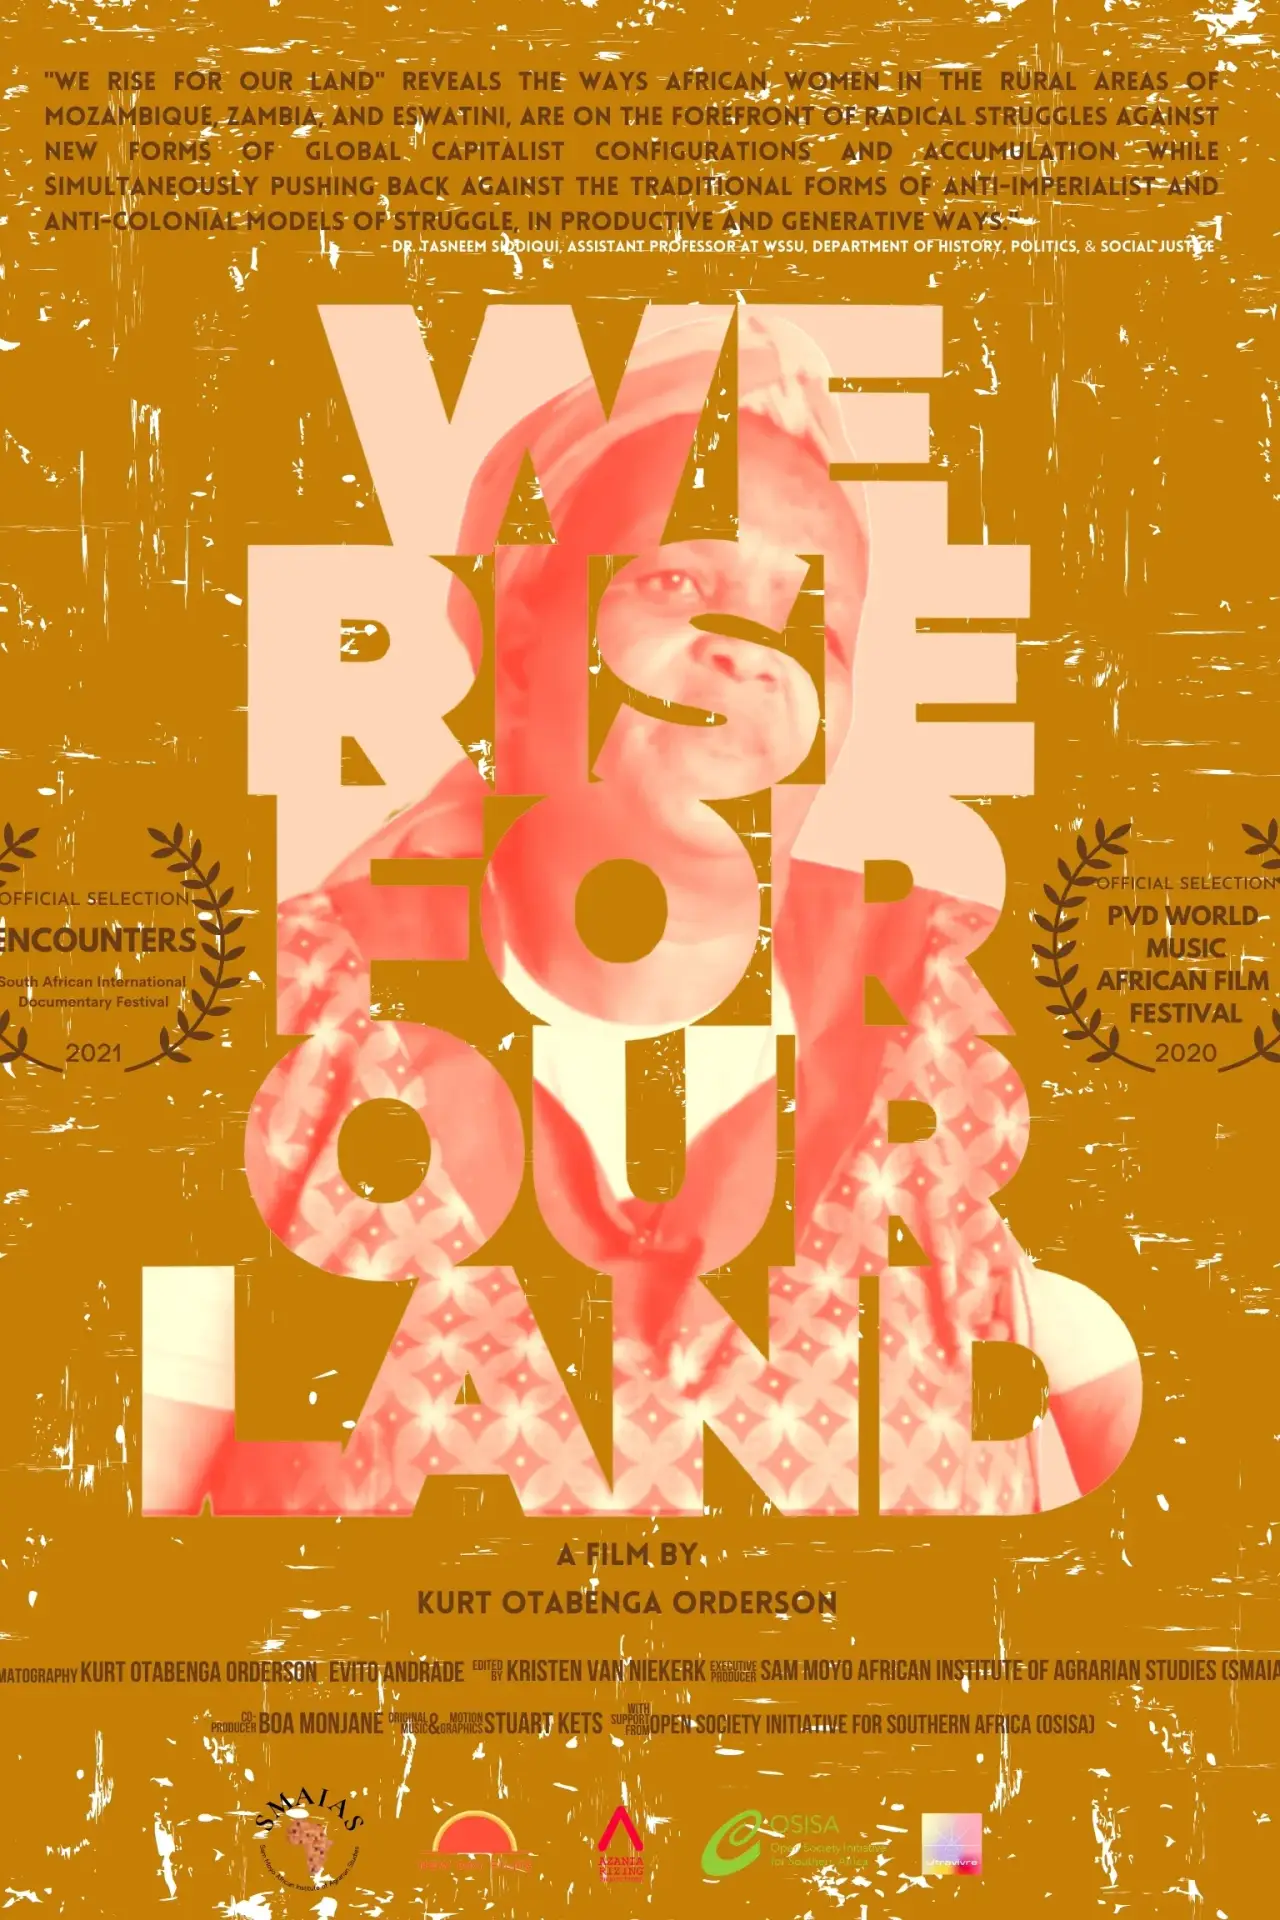 We Rise for Our Land